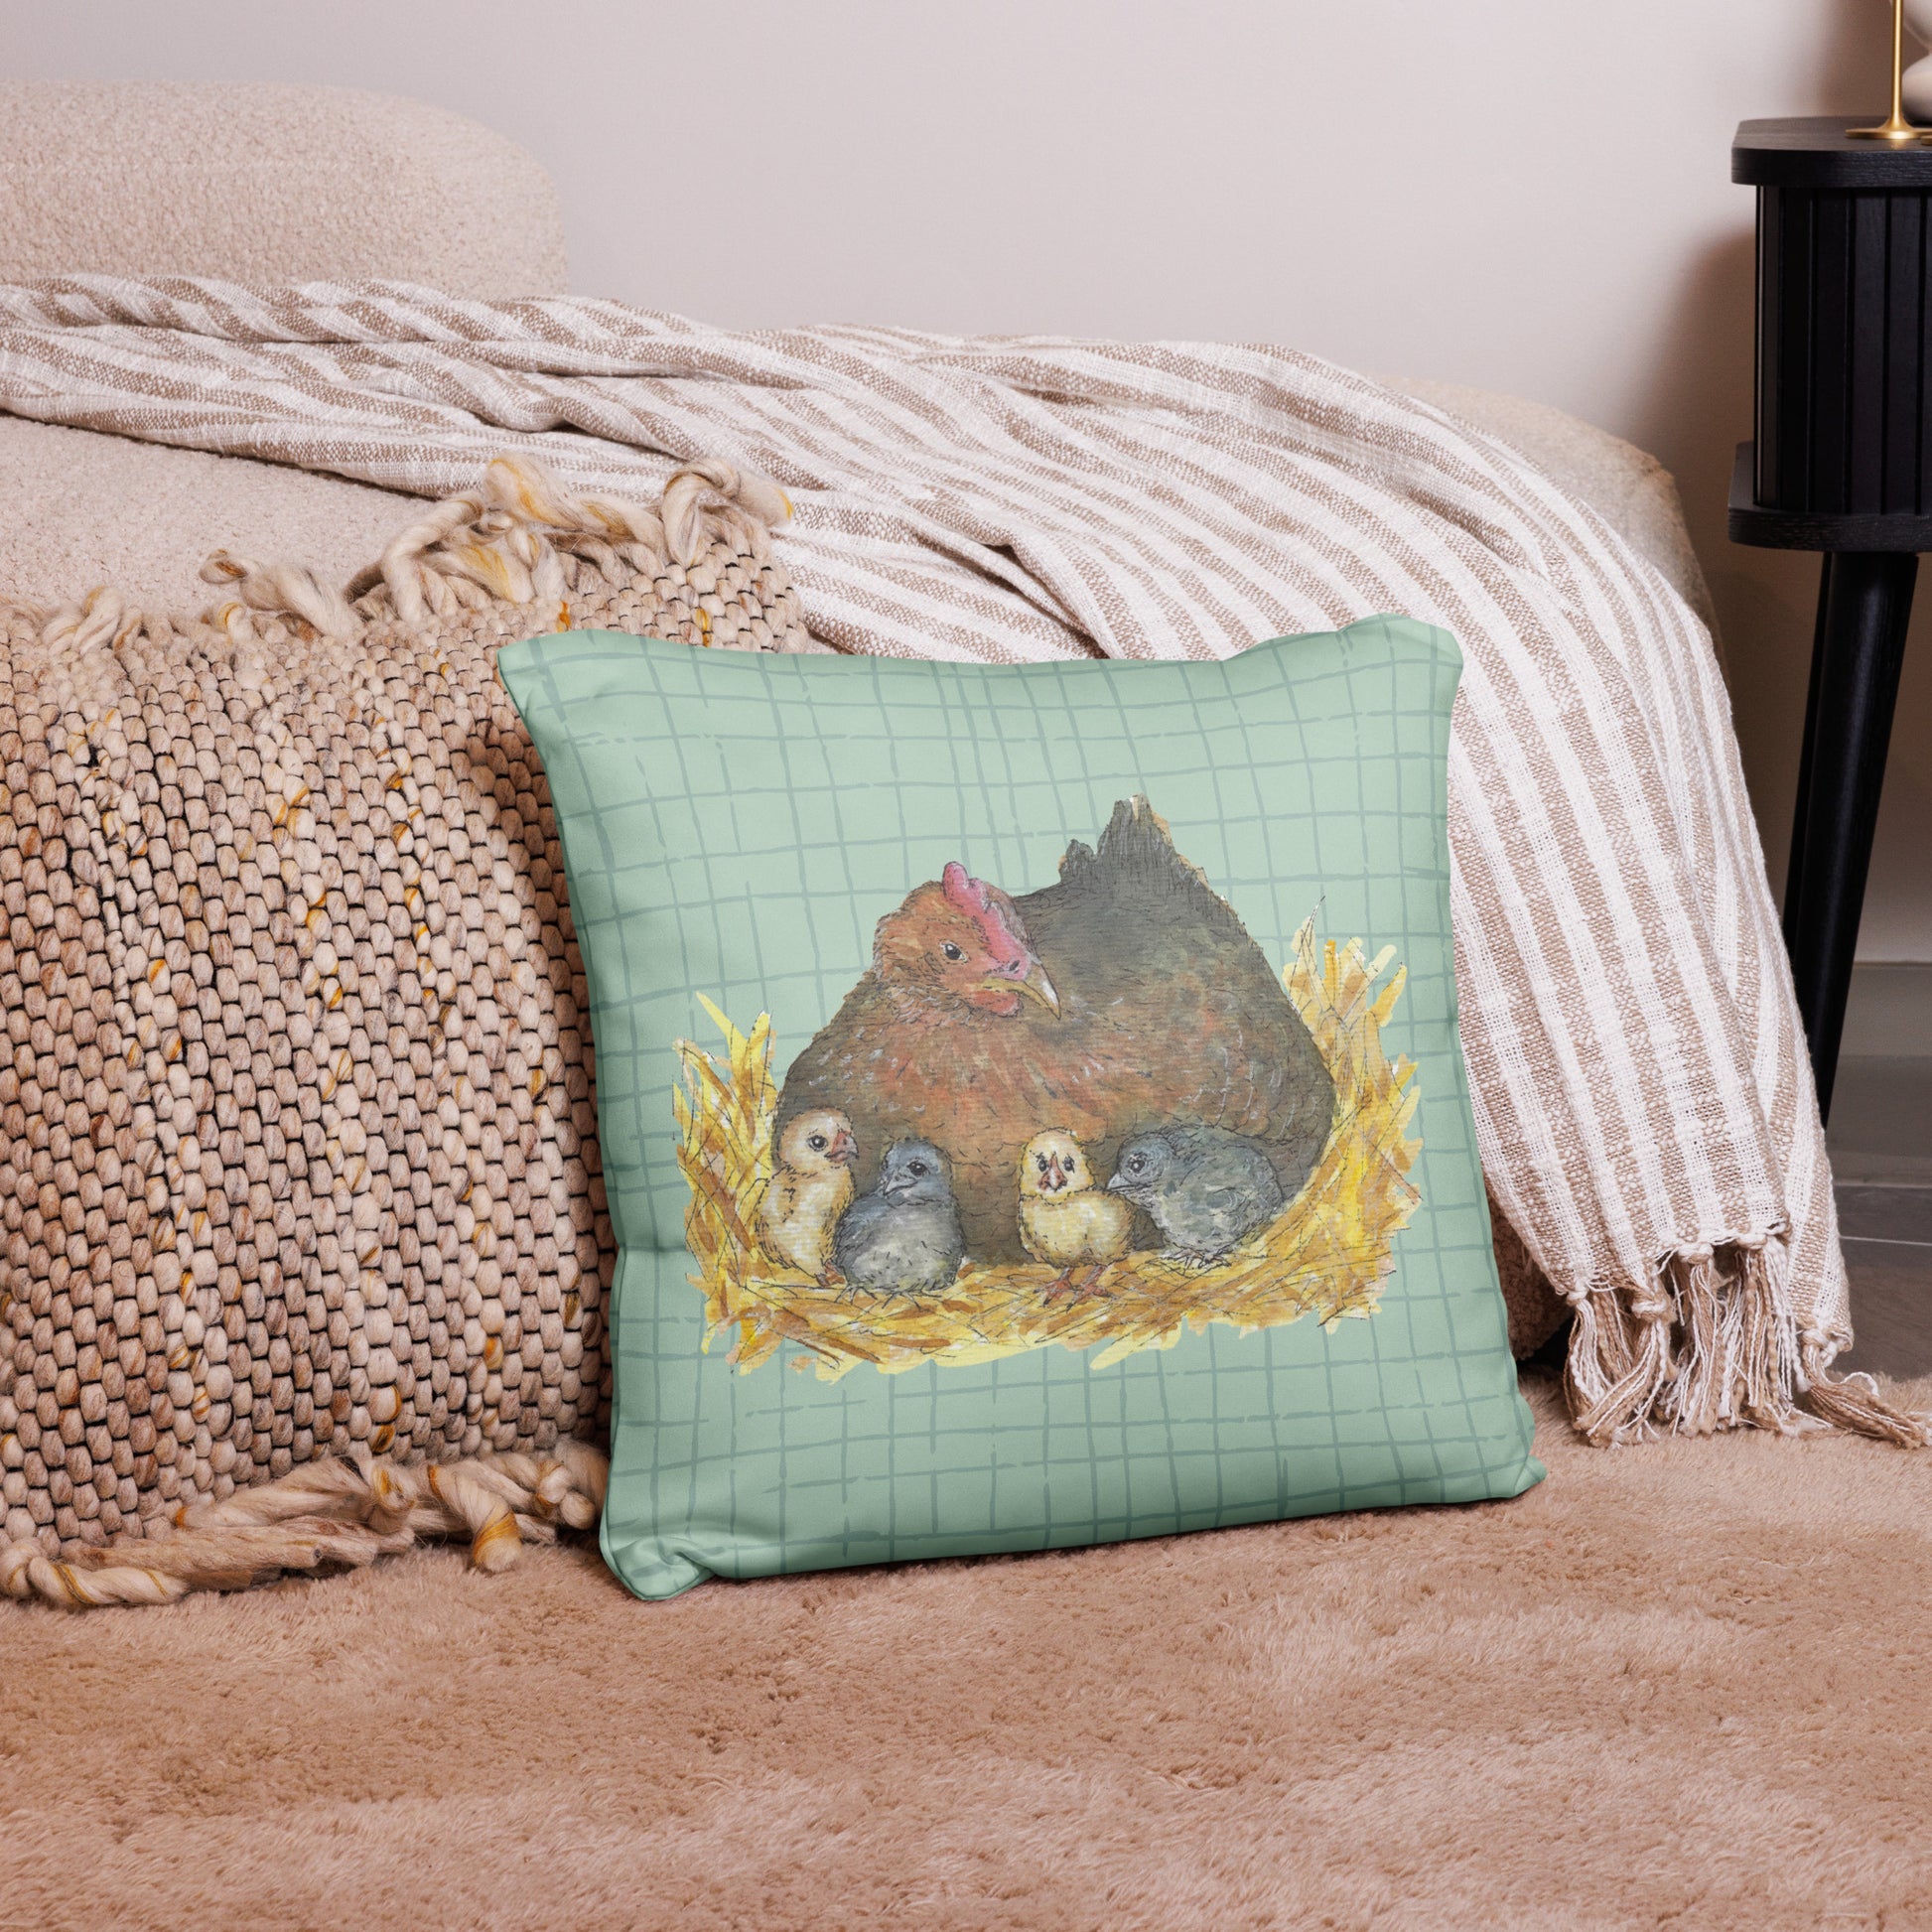 18 by 18 inch mother hen decorative throw pillow. Features Heather Silver's watercolor print of a mother hen and chicks on a green cross-hatched background. Image printed on both sides. Has a hidden zipper and washable cover. Comes with shape-retaining insert. Back view of pillow on tan carpet.